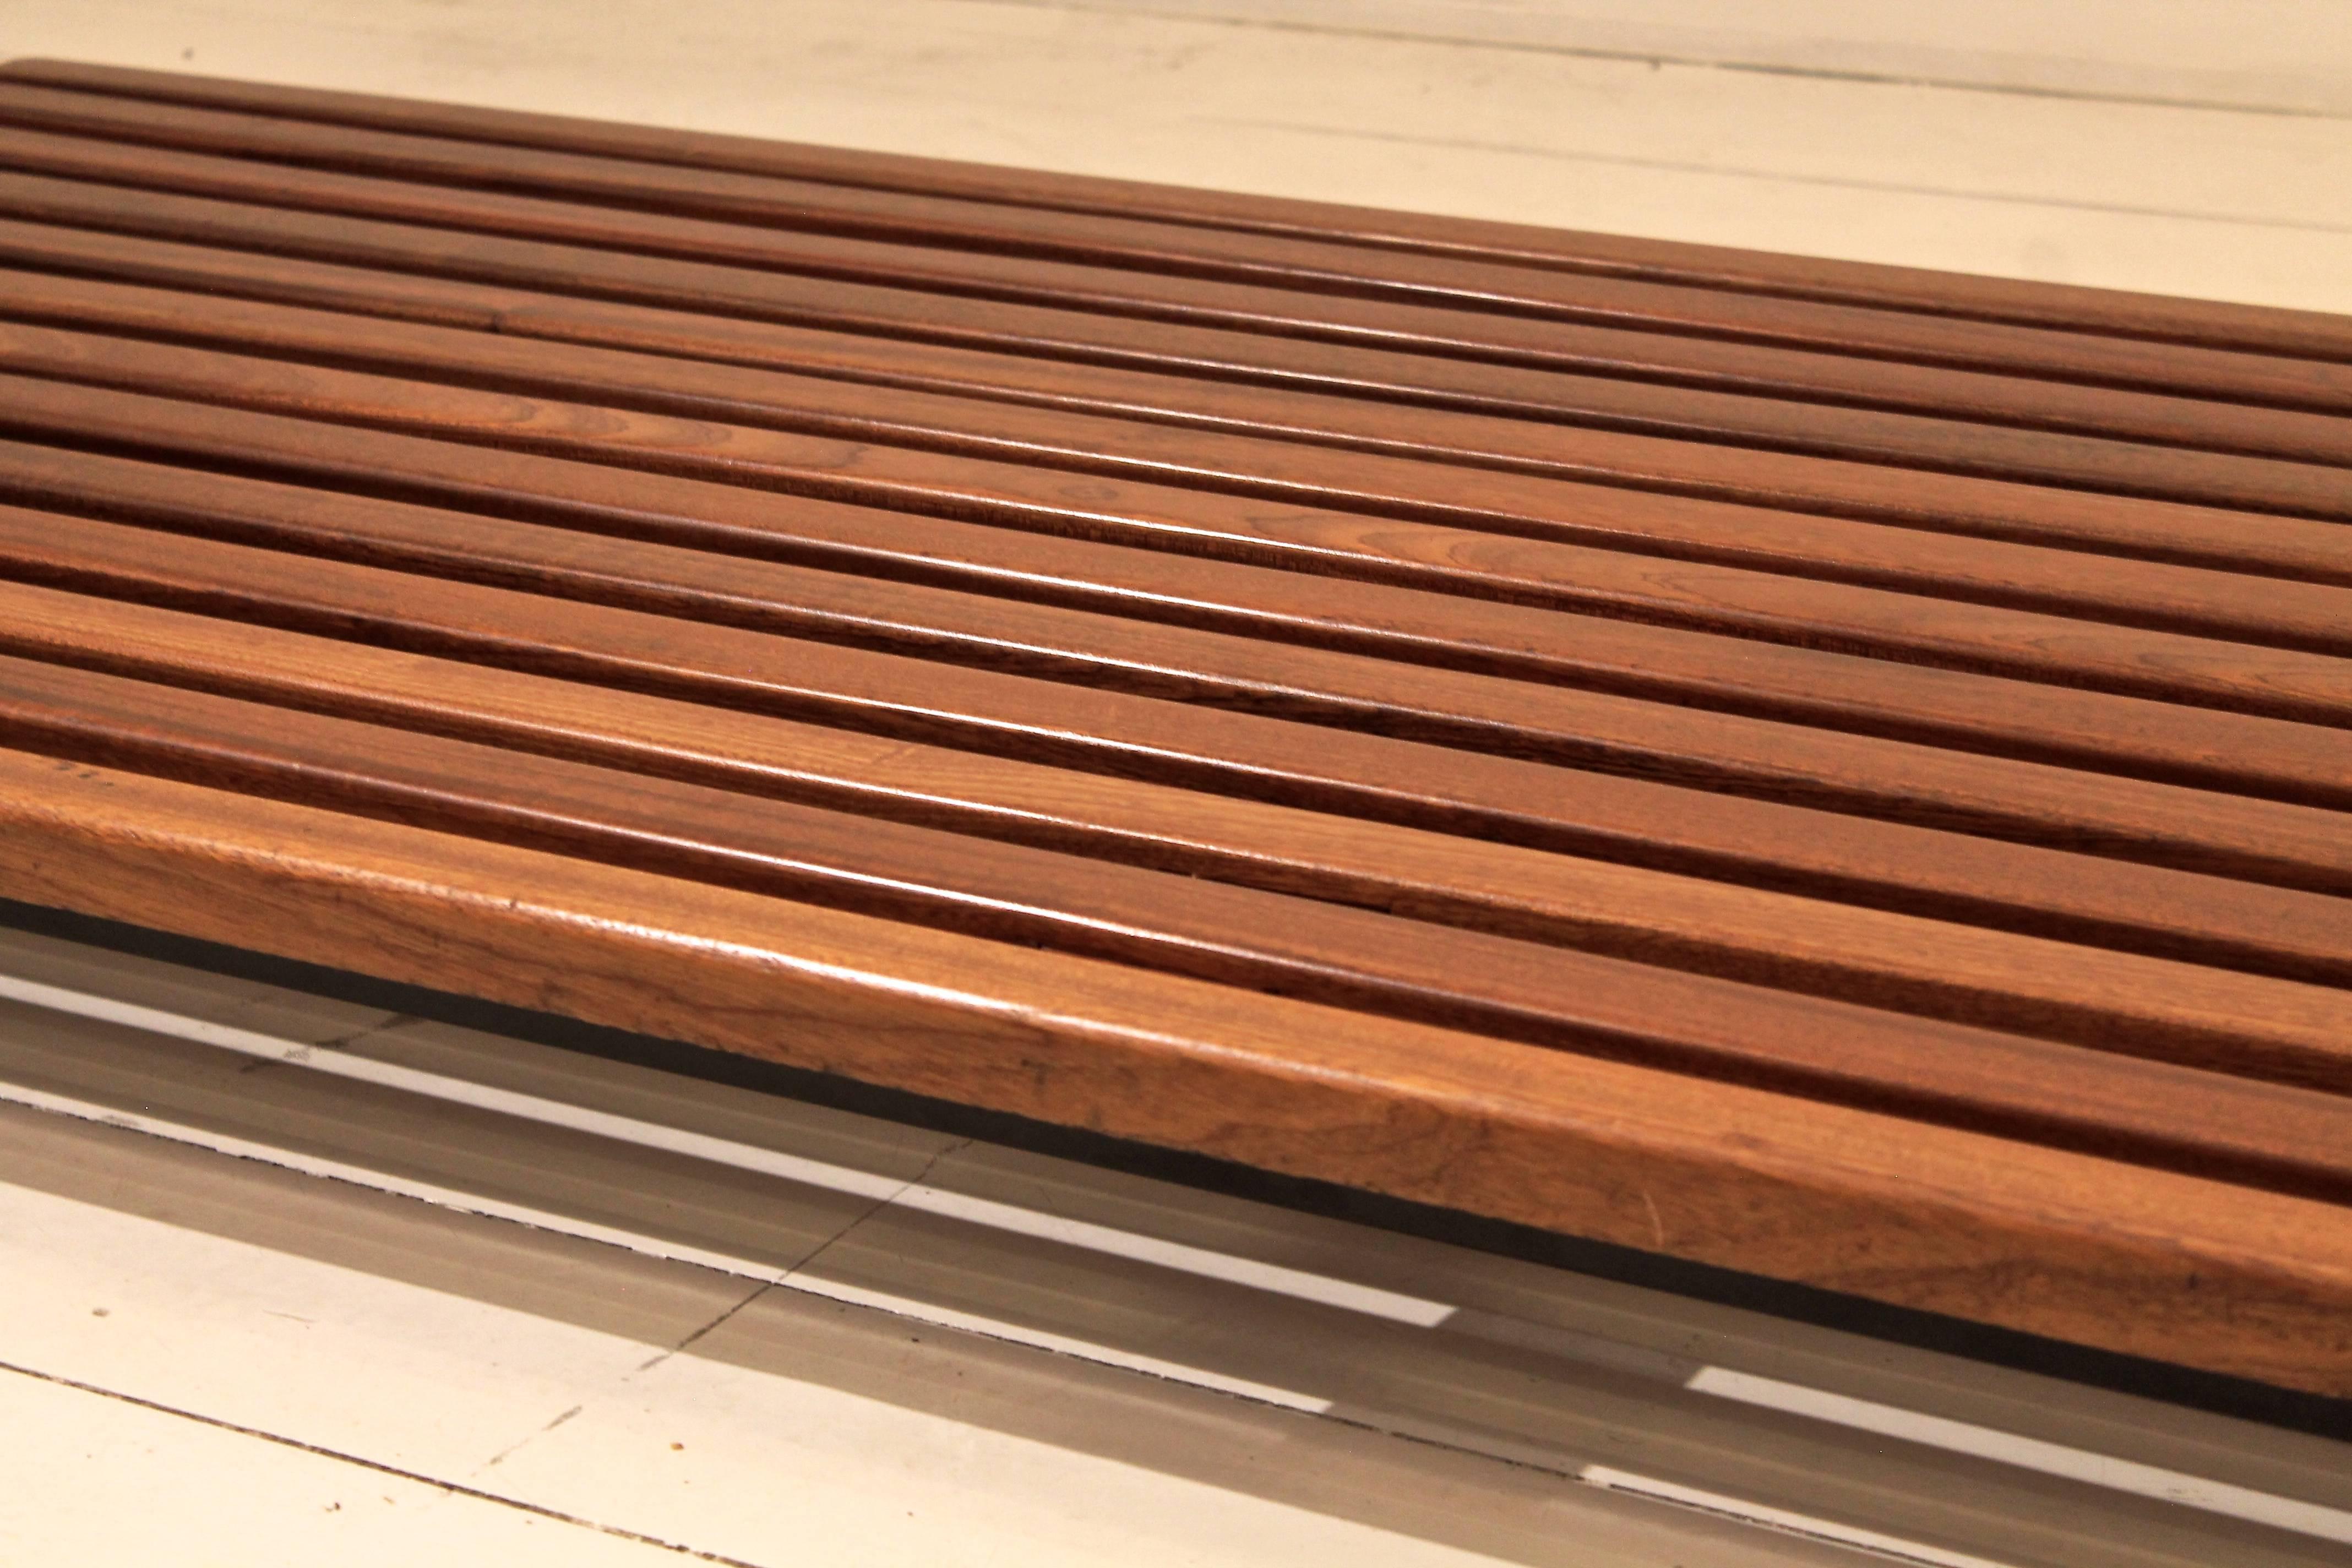 Bench designed by Charlotte Perriand for the Cansado dormitory town in Mauritania.
Made in France.